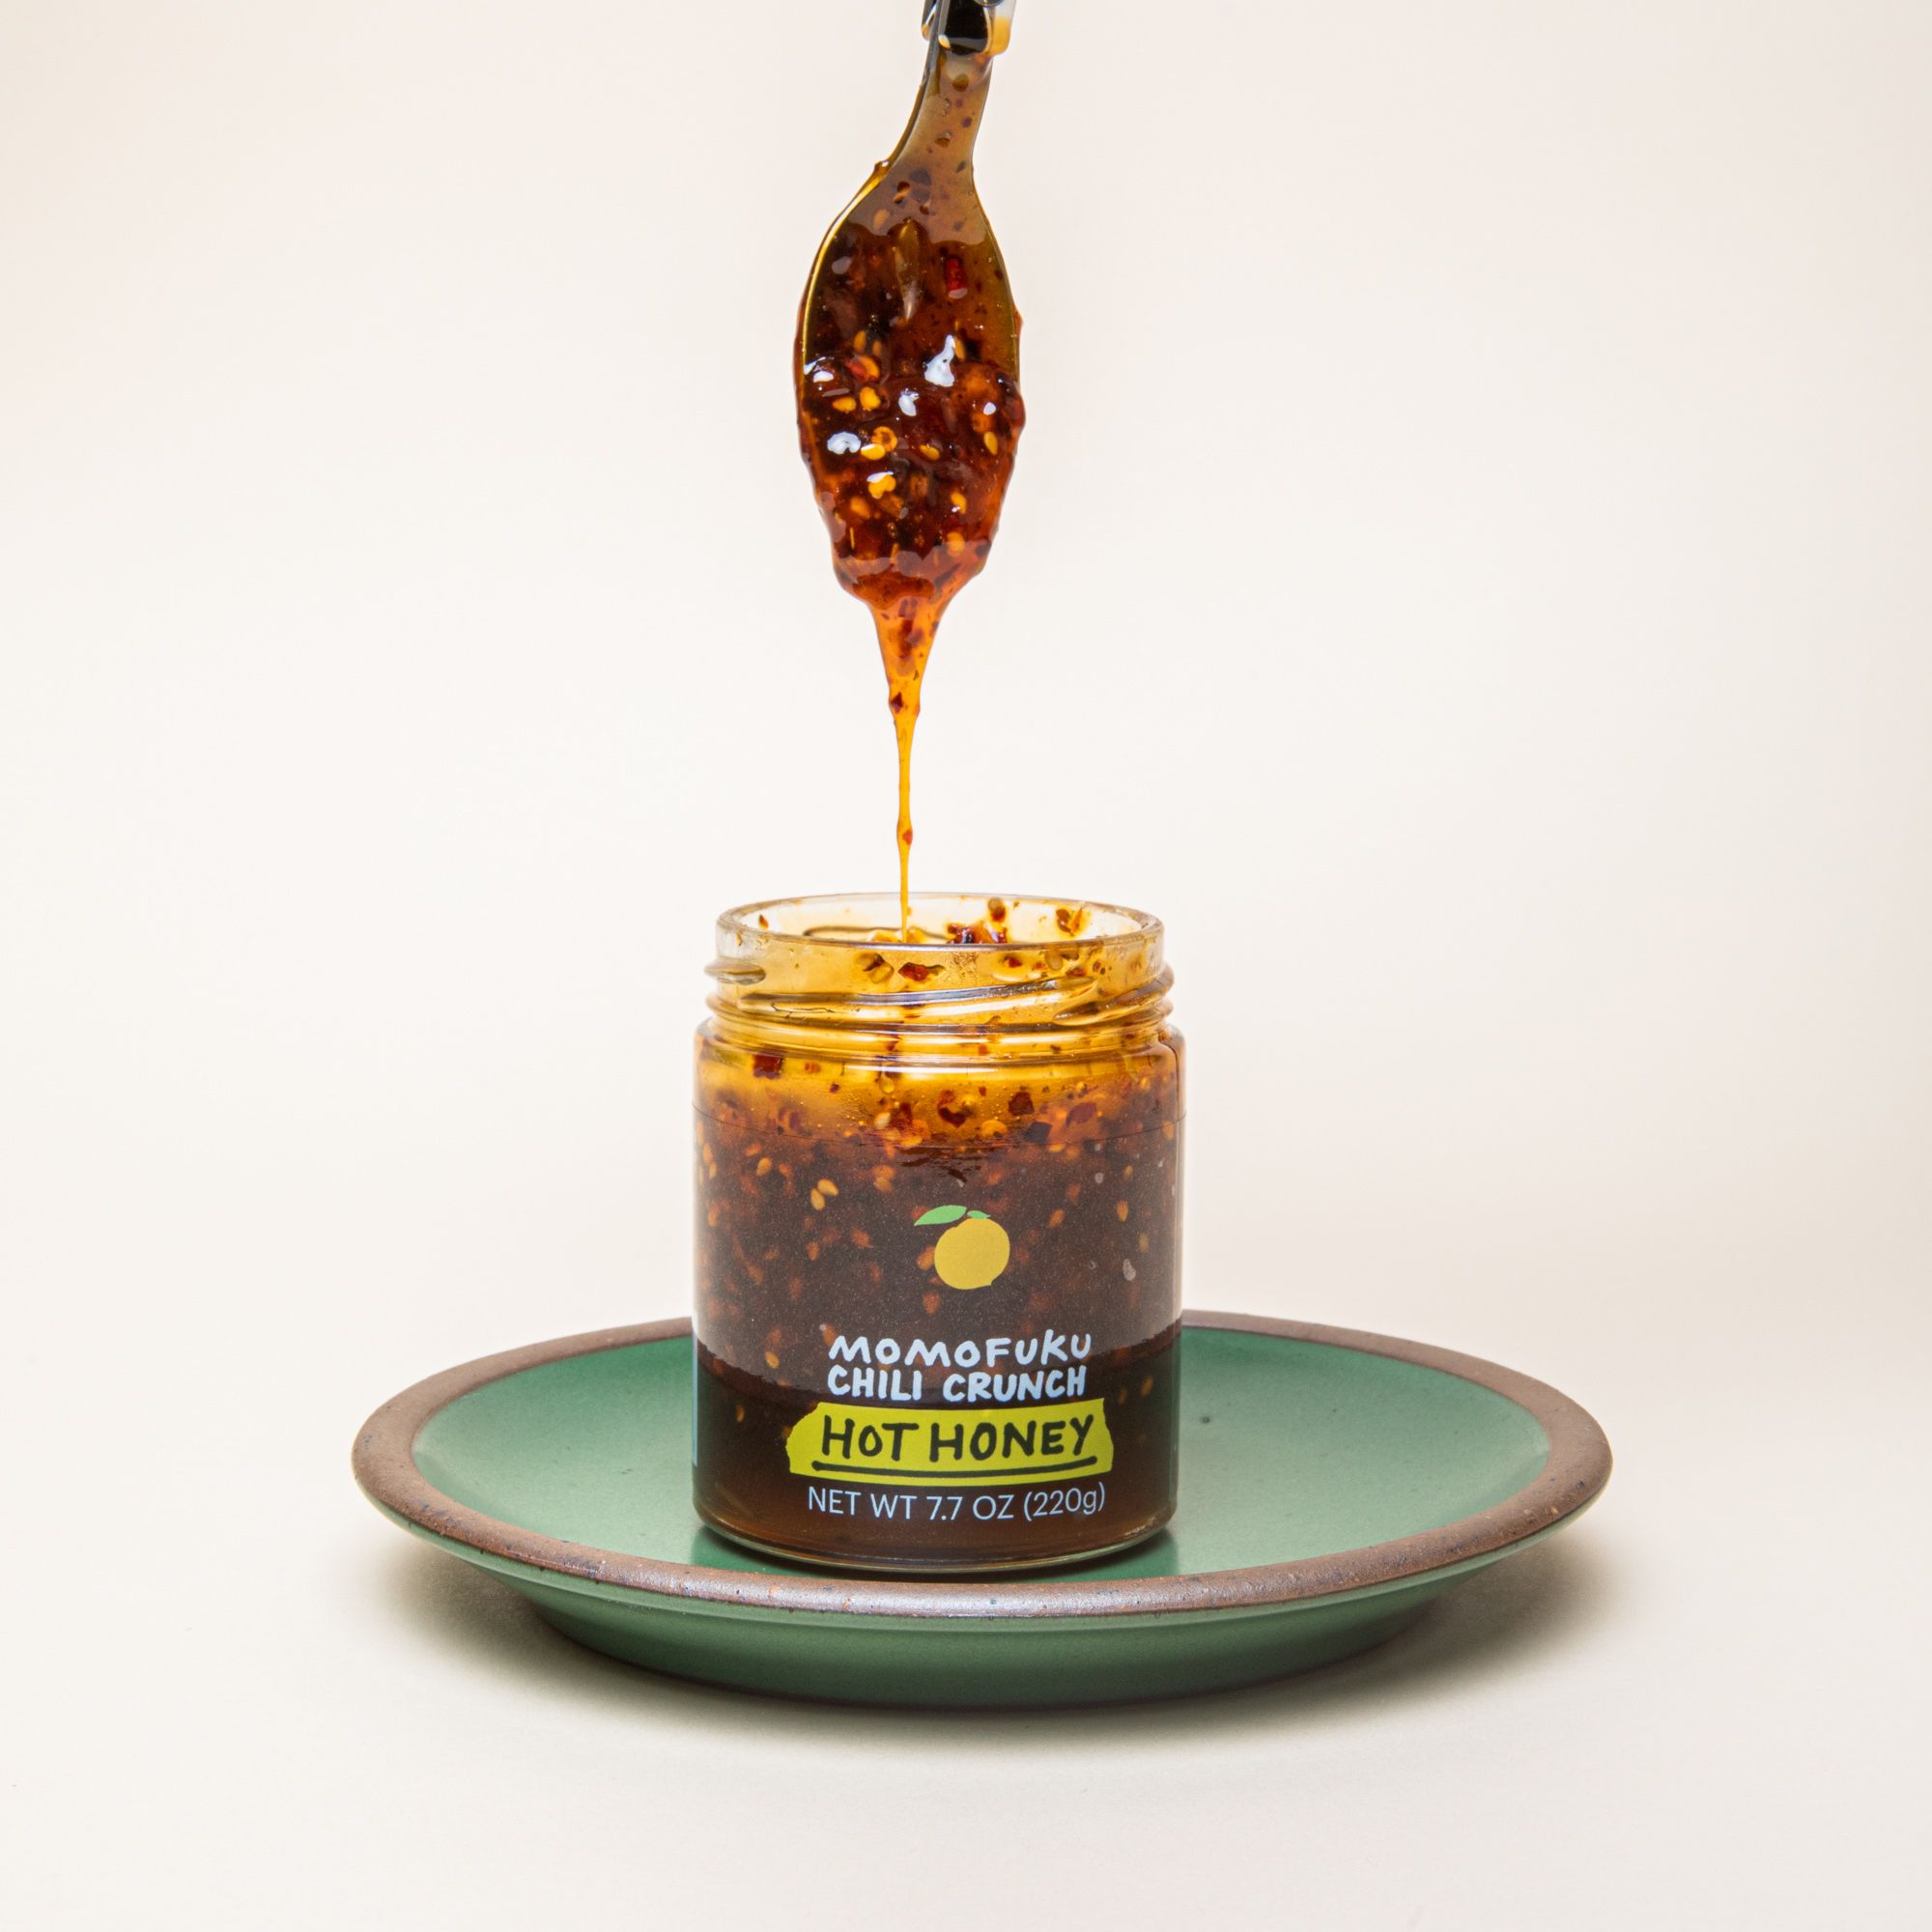 A spoon dripping some warm brown honey with chili flakes above a clear jar - the jar has a label that reads, "Momofuku Chili Crunch Hot Honey"